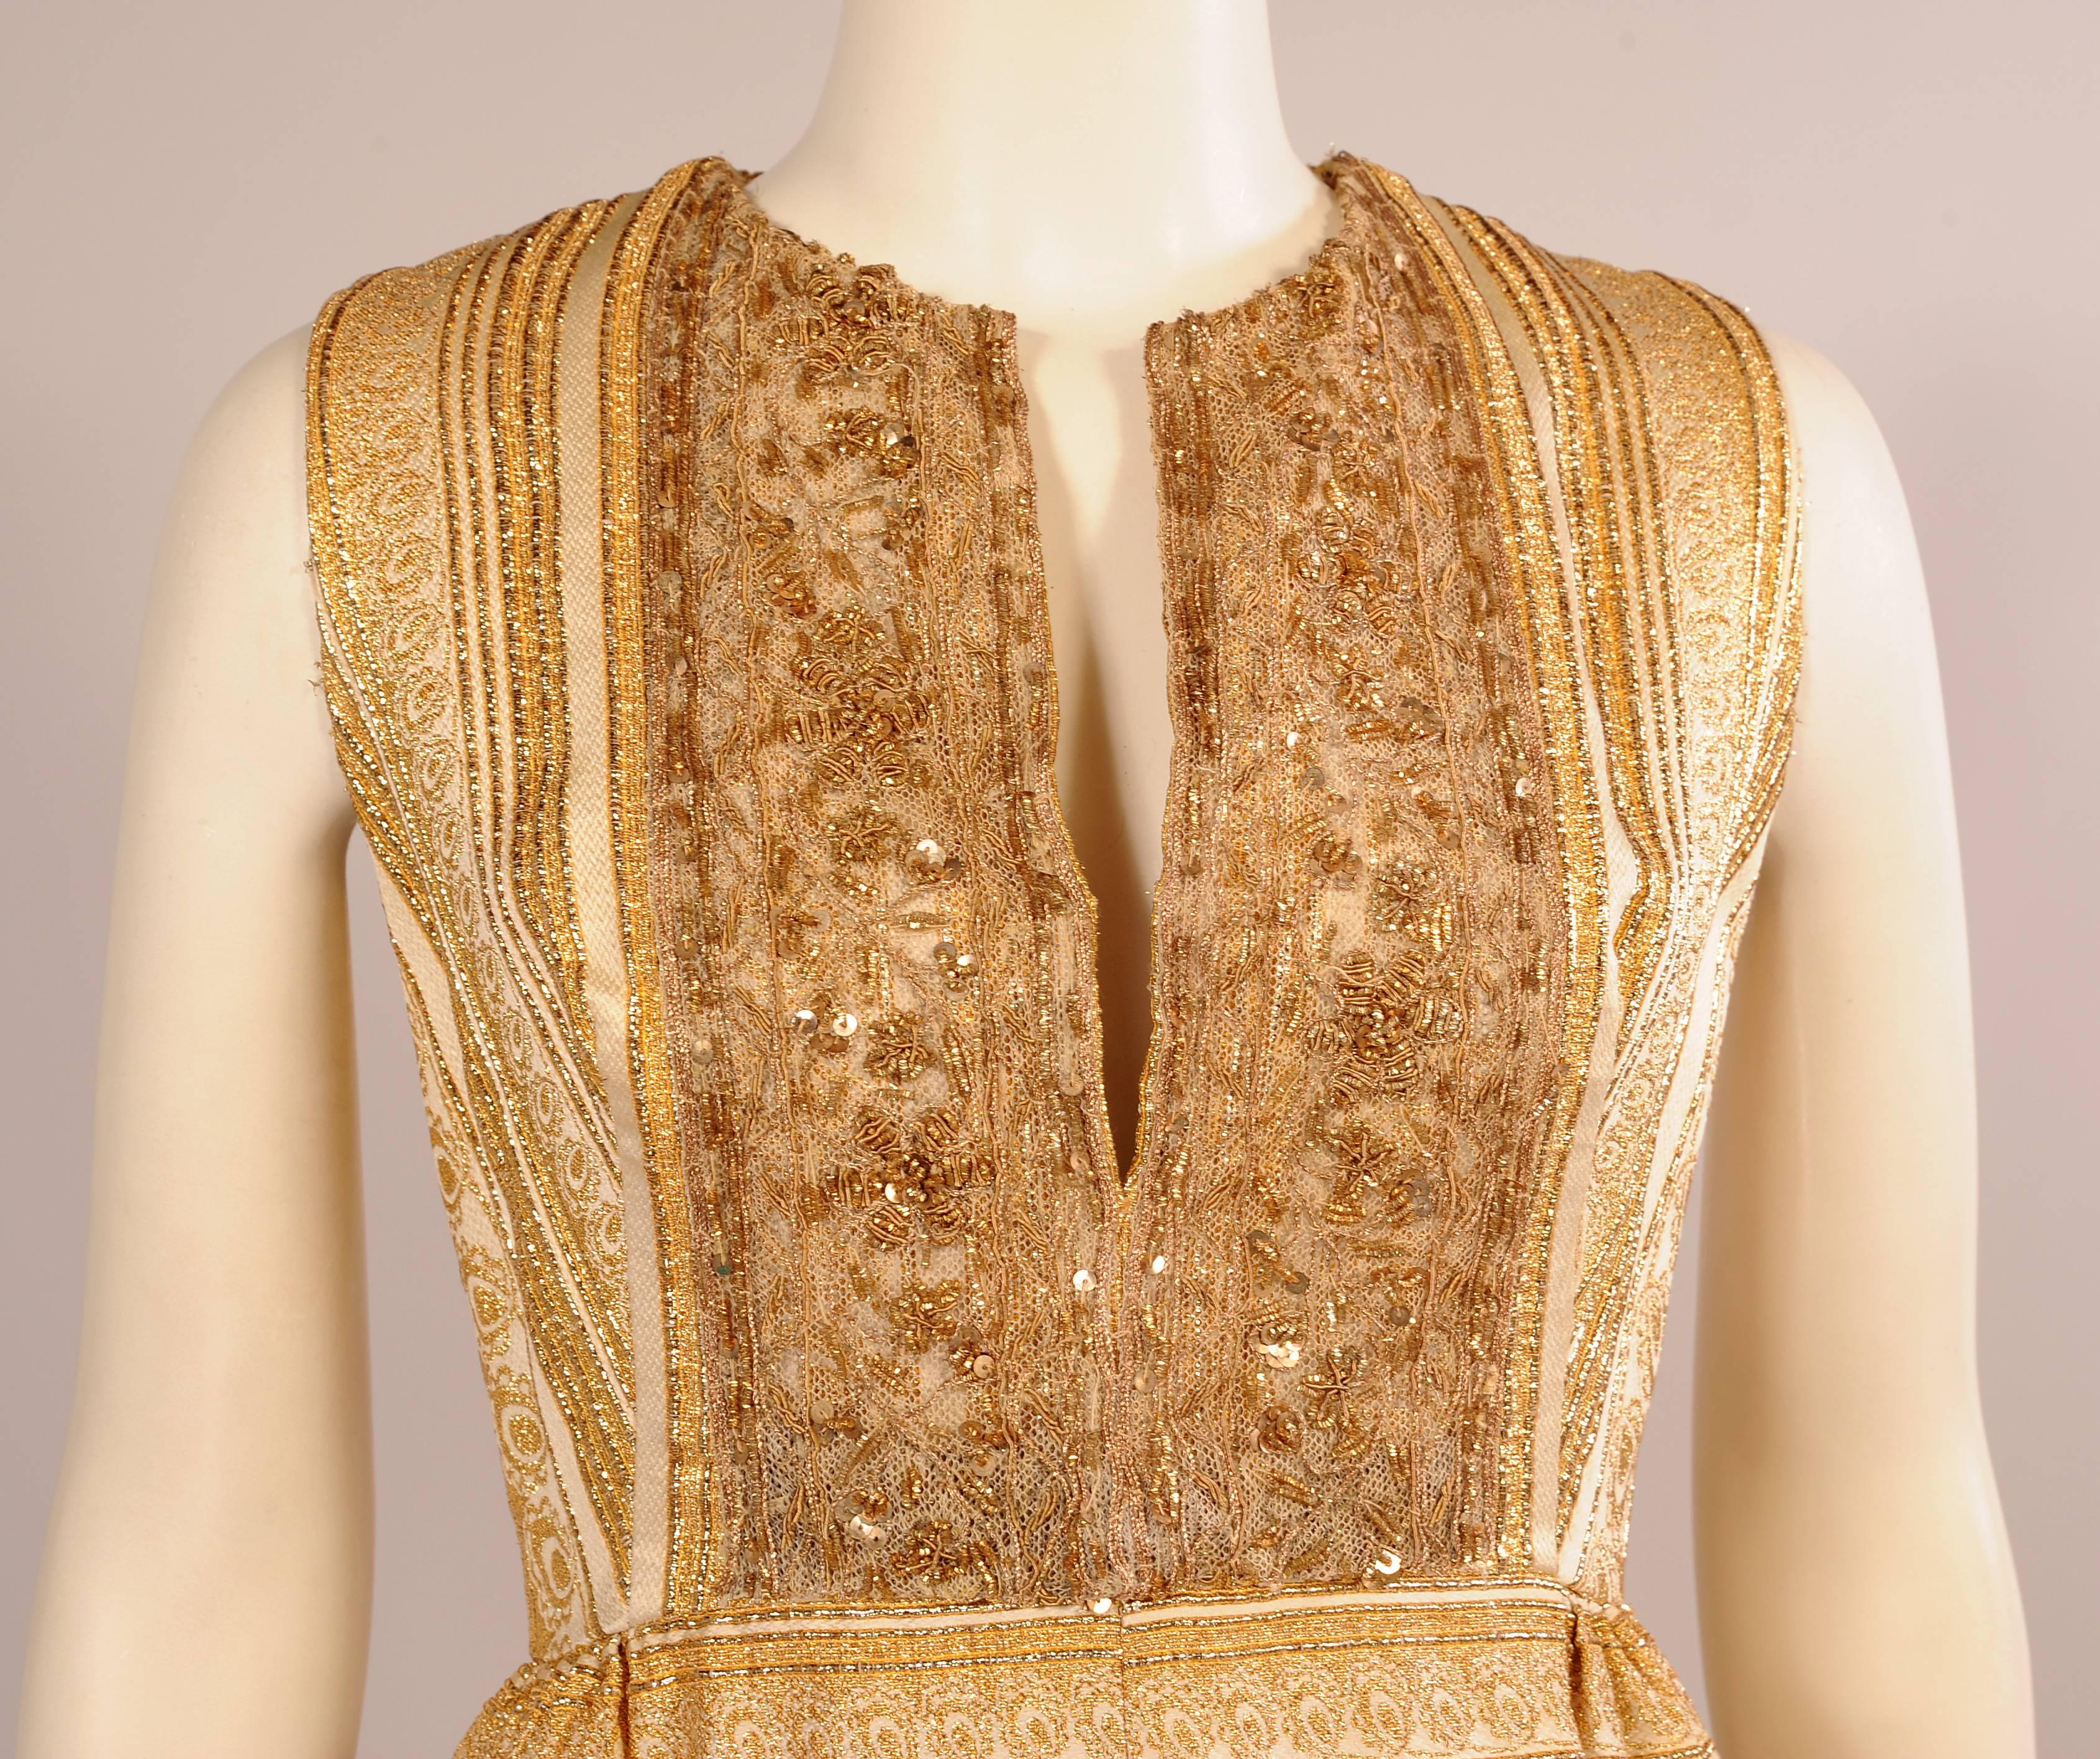 A Modern Couture Original retailed by Bonwit Teller in the 1960's this sparkling gold and cream woven lame dress has a jeweled tulle bodice with a plunging neckline and slightly raised waist line. The skirt is gently gathered over the hips and the